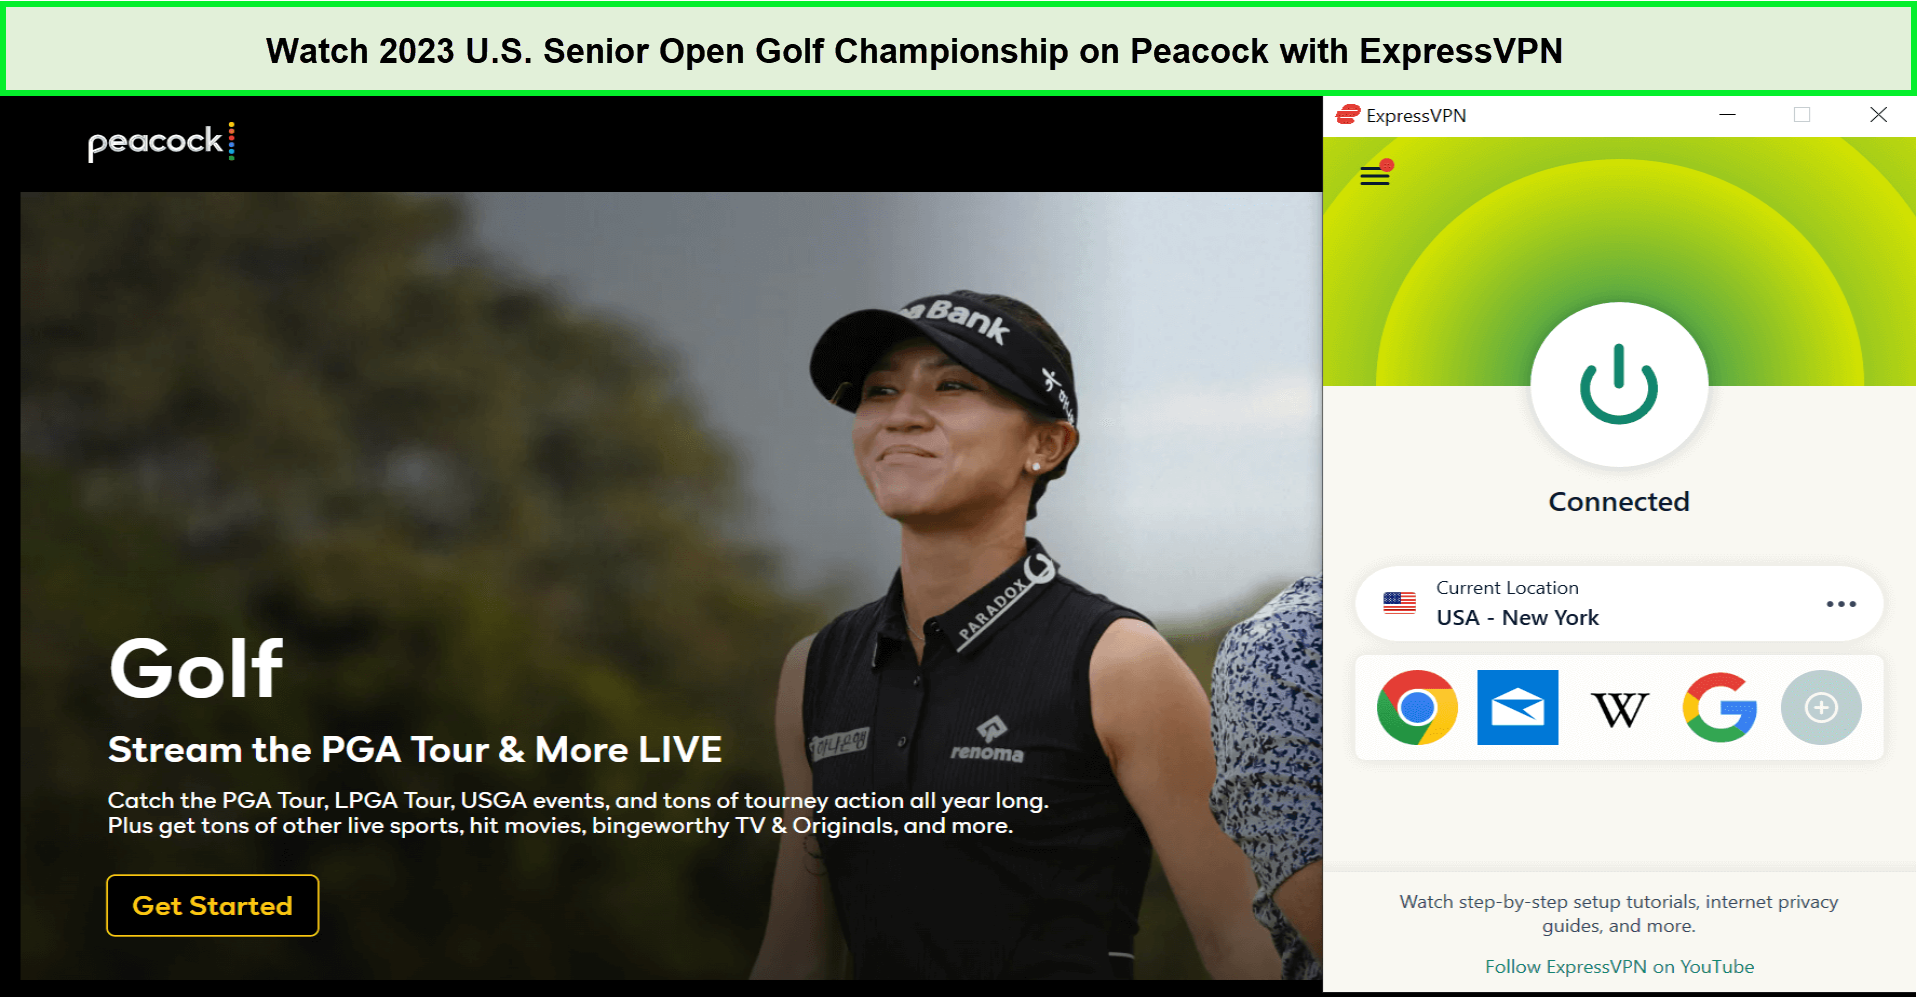 Watch-2023-U.S.-Senior-Open-Golf-Championship-in-Japan-on-Peacock-with-ExpressVPN